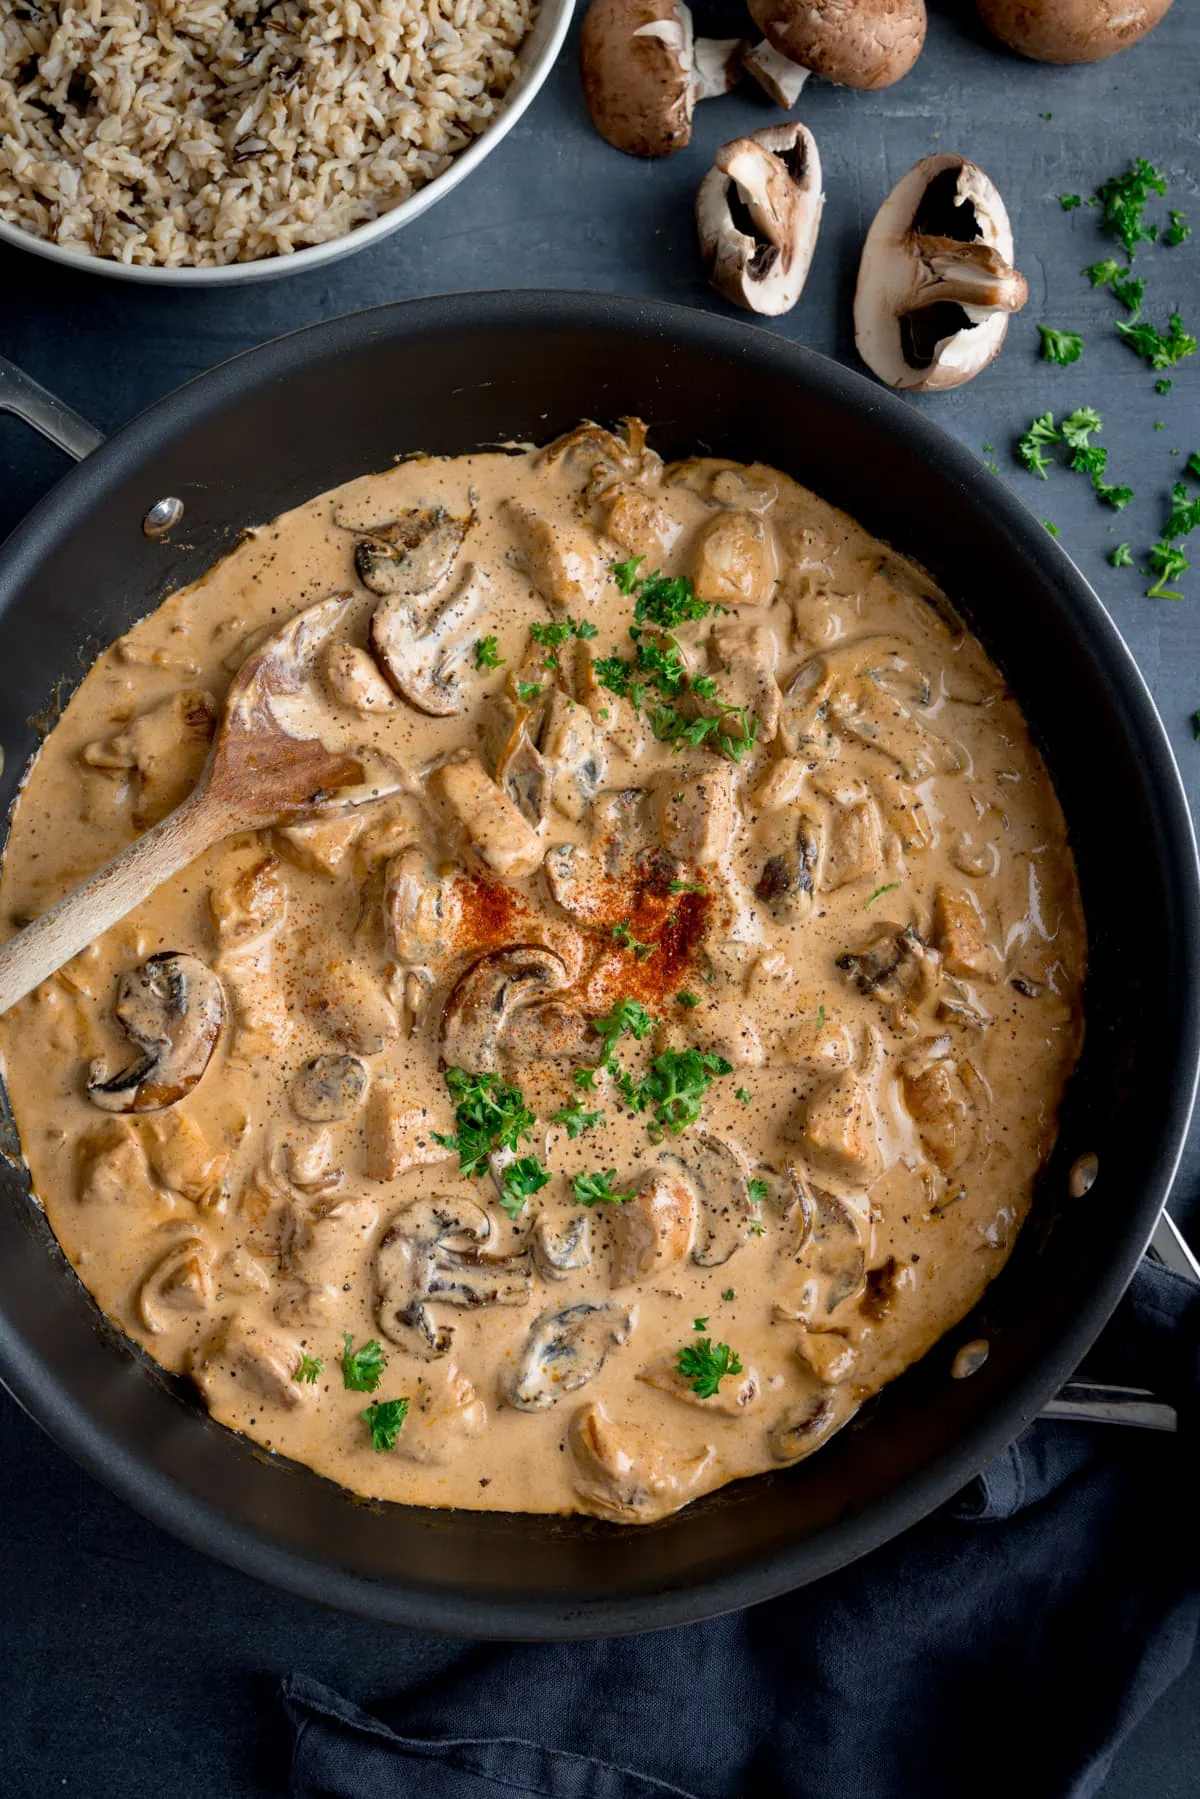 Tall overhead shot of chicken and mushroom stroganoff in a dark pan. The pan is on a dark surface with a wooden spoon sticking out. There is a bowl of cooked rice next to the pan and some mushrooms and chopped parsley scattered around.